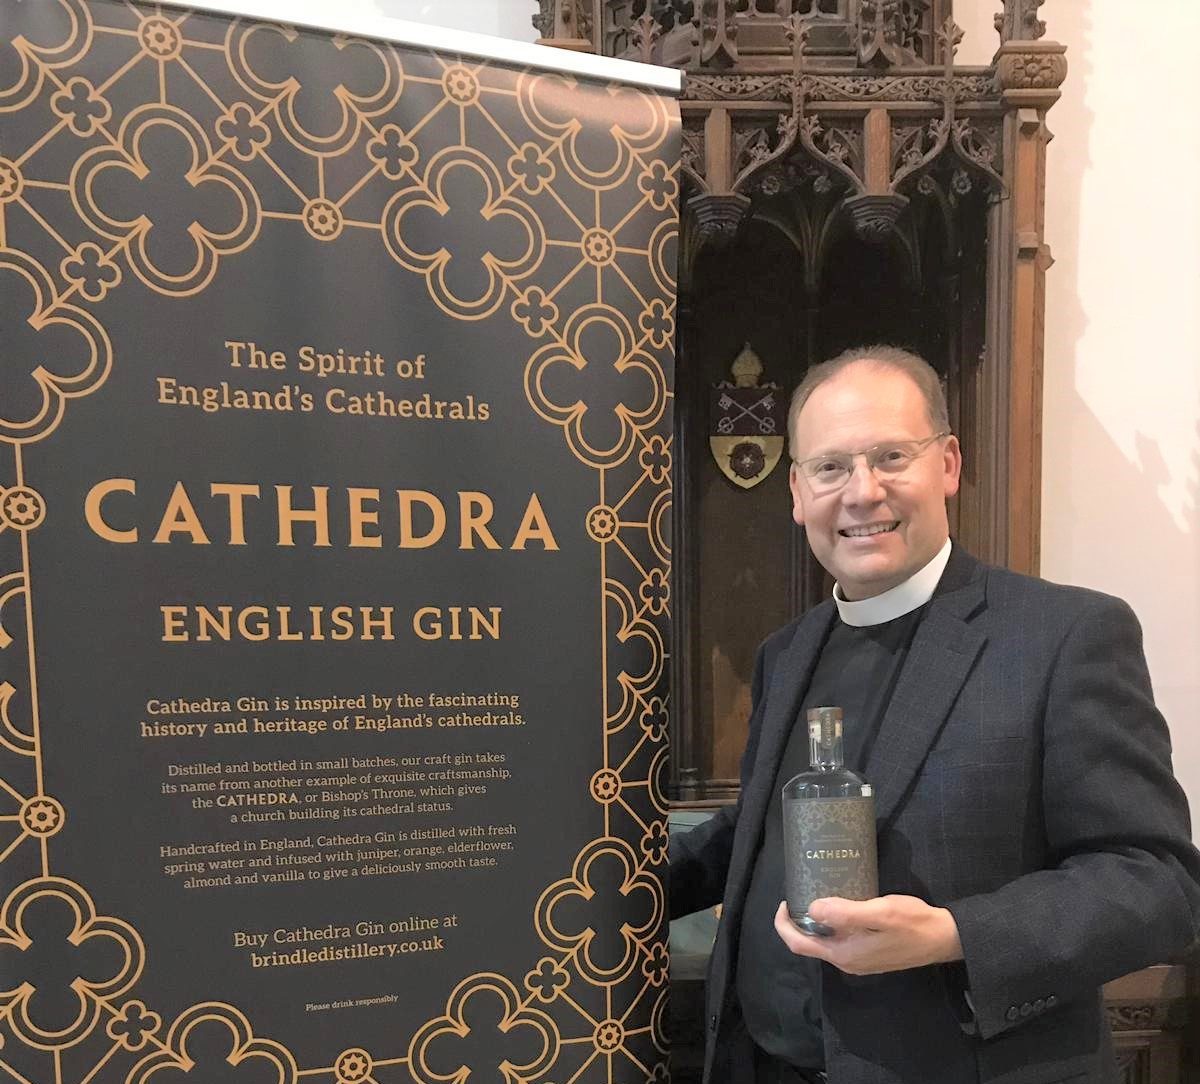 Dean Peter Howell Jones with Cathedra Gin